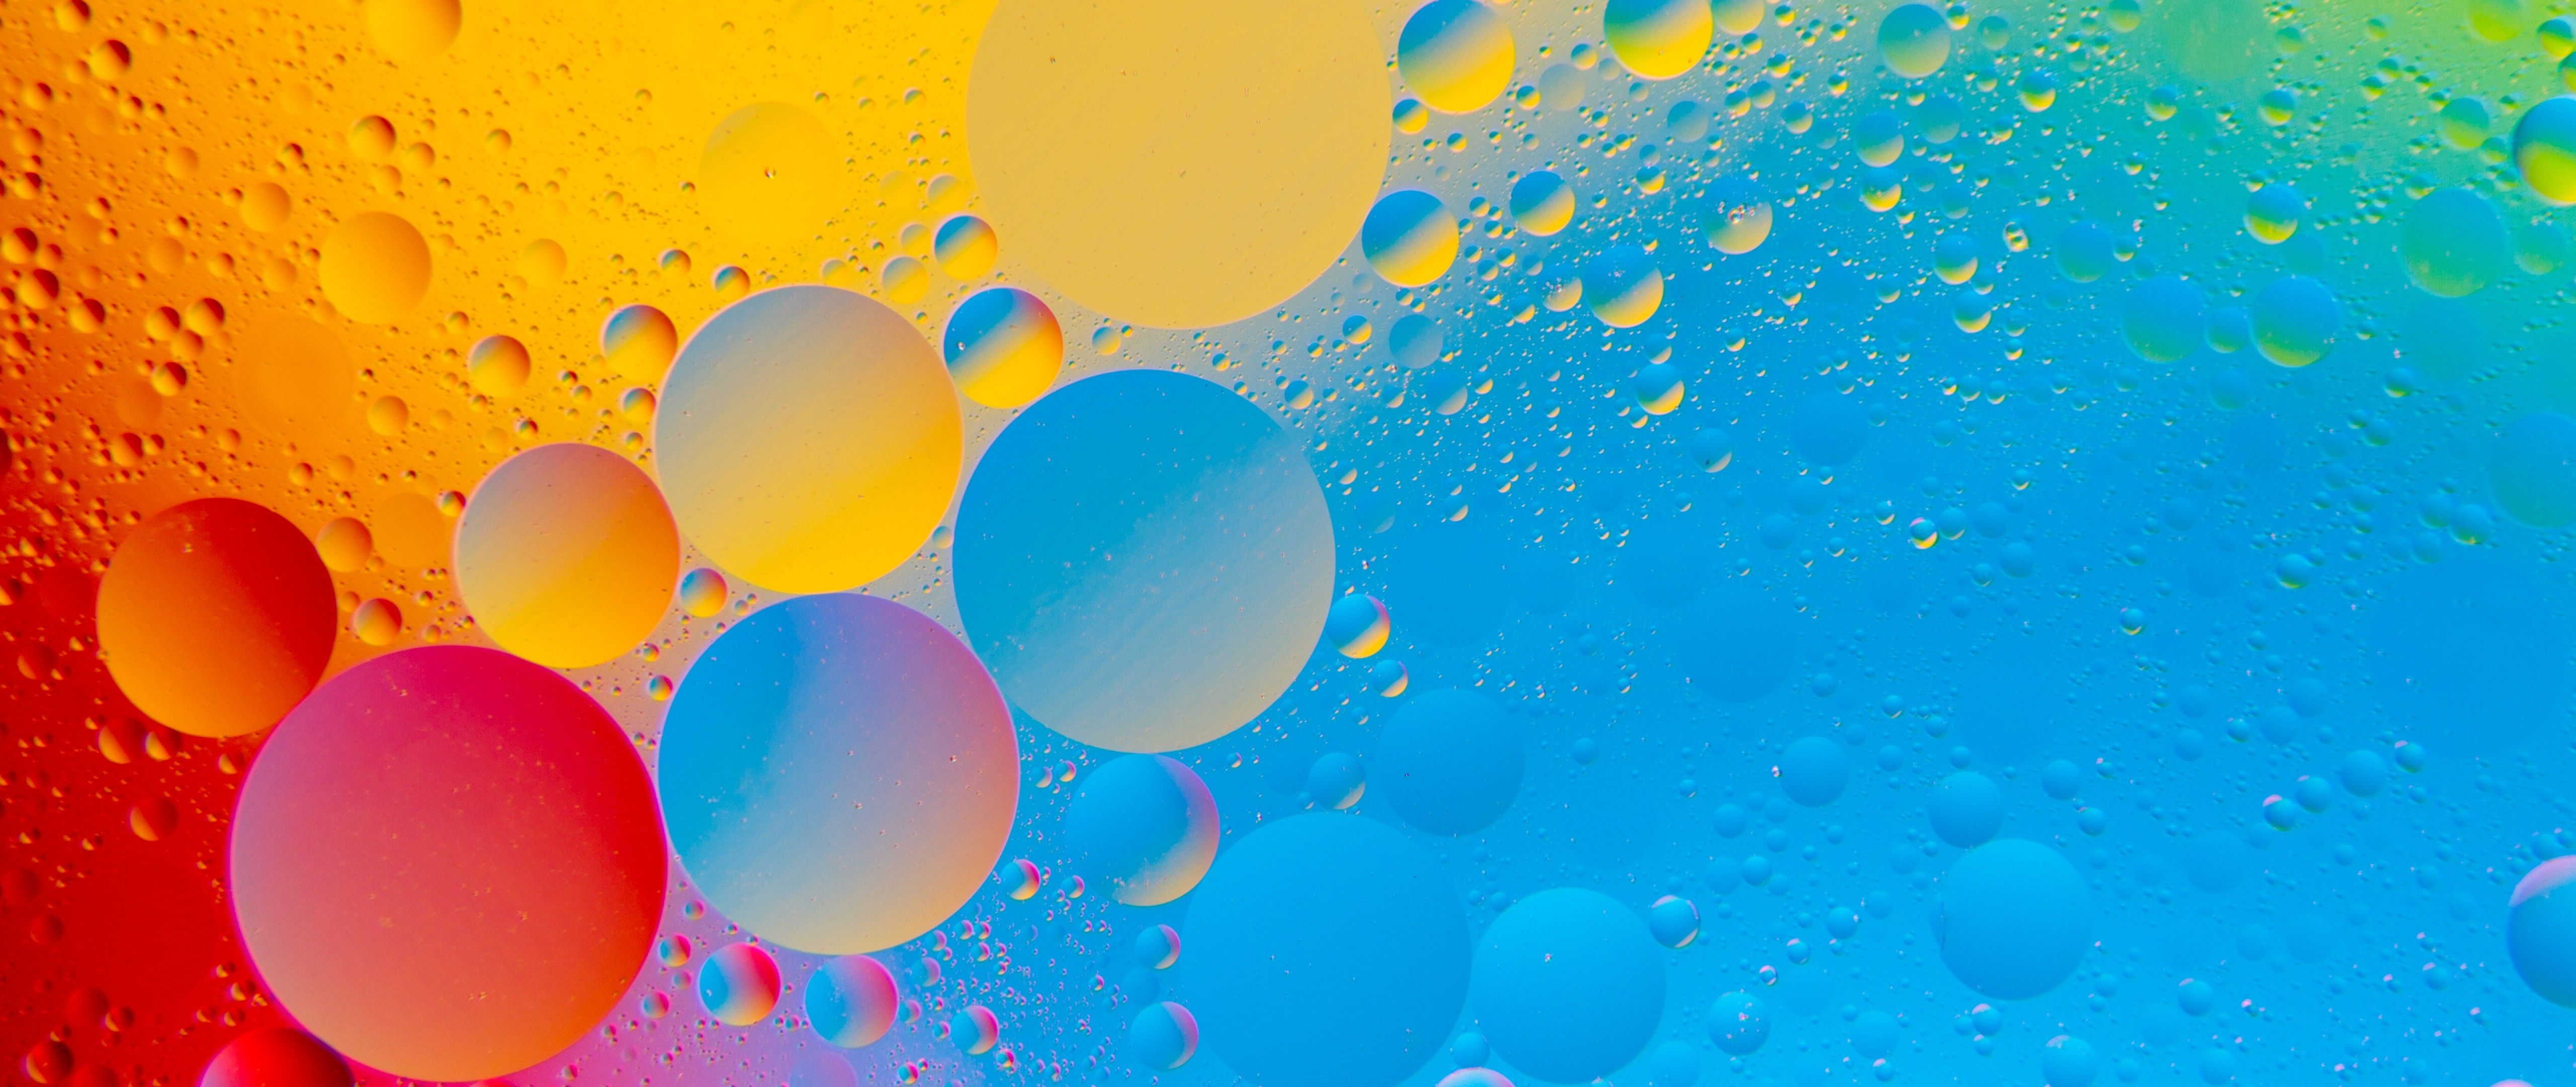 wallpaper 4k ultra hd, blue, water, colorfulness, balloon, yellow, sky, circle, liquid bubble, pattern, party supply